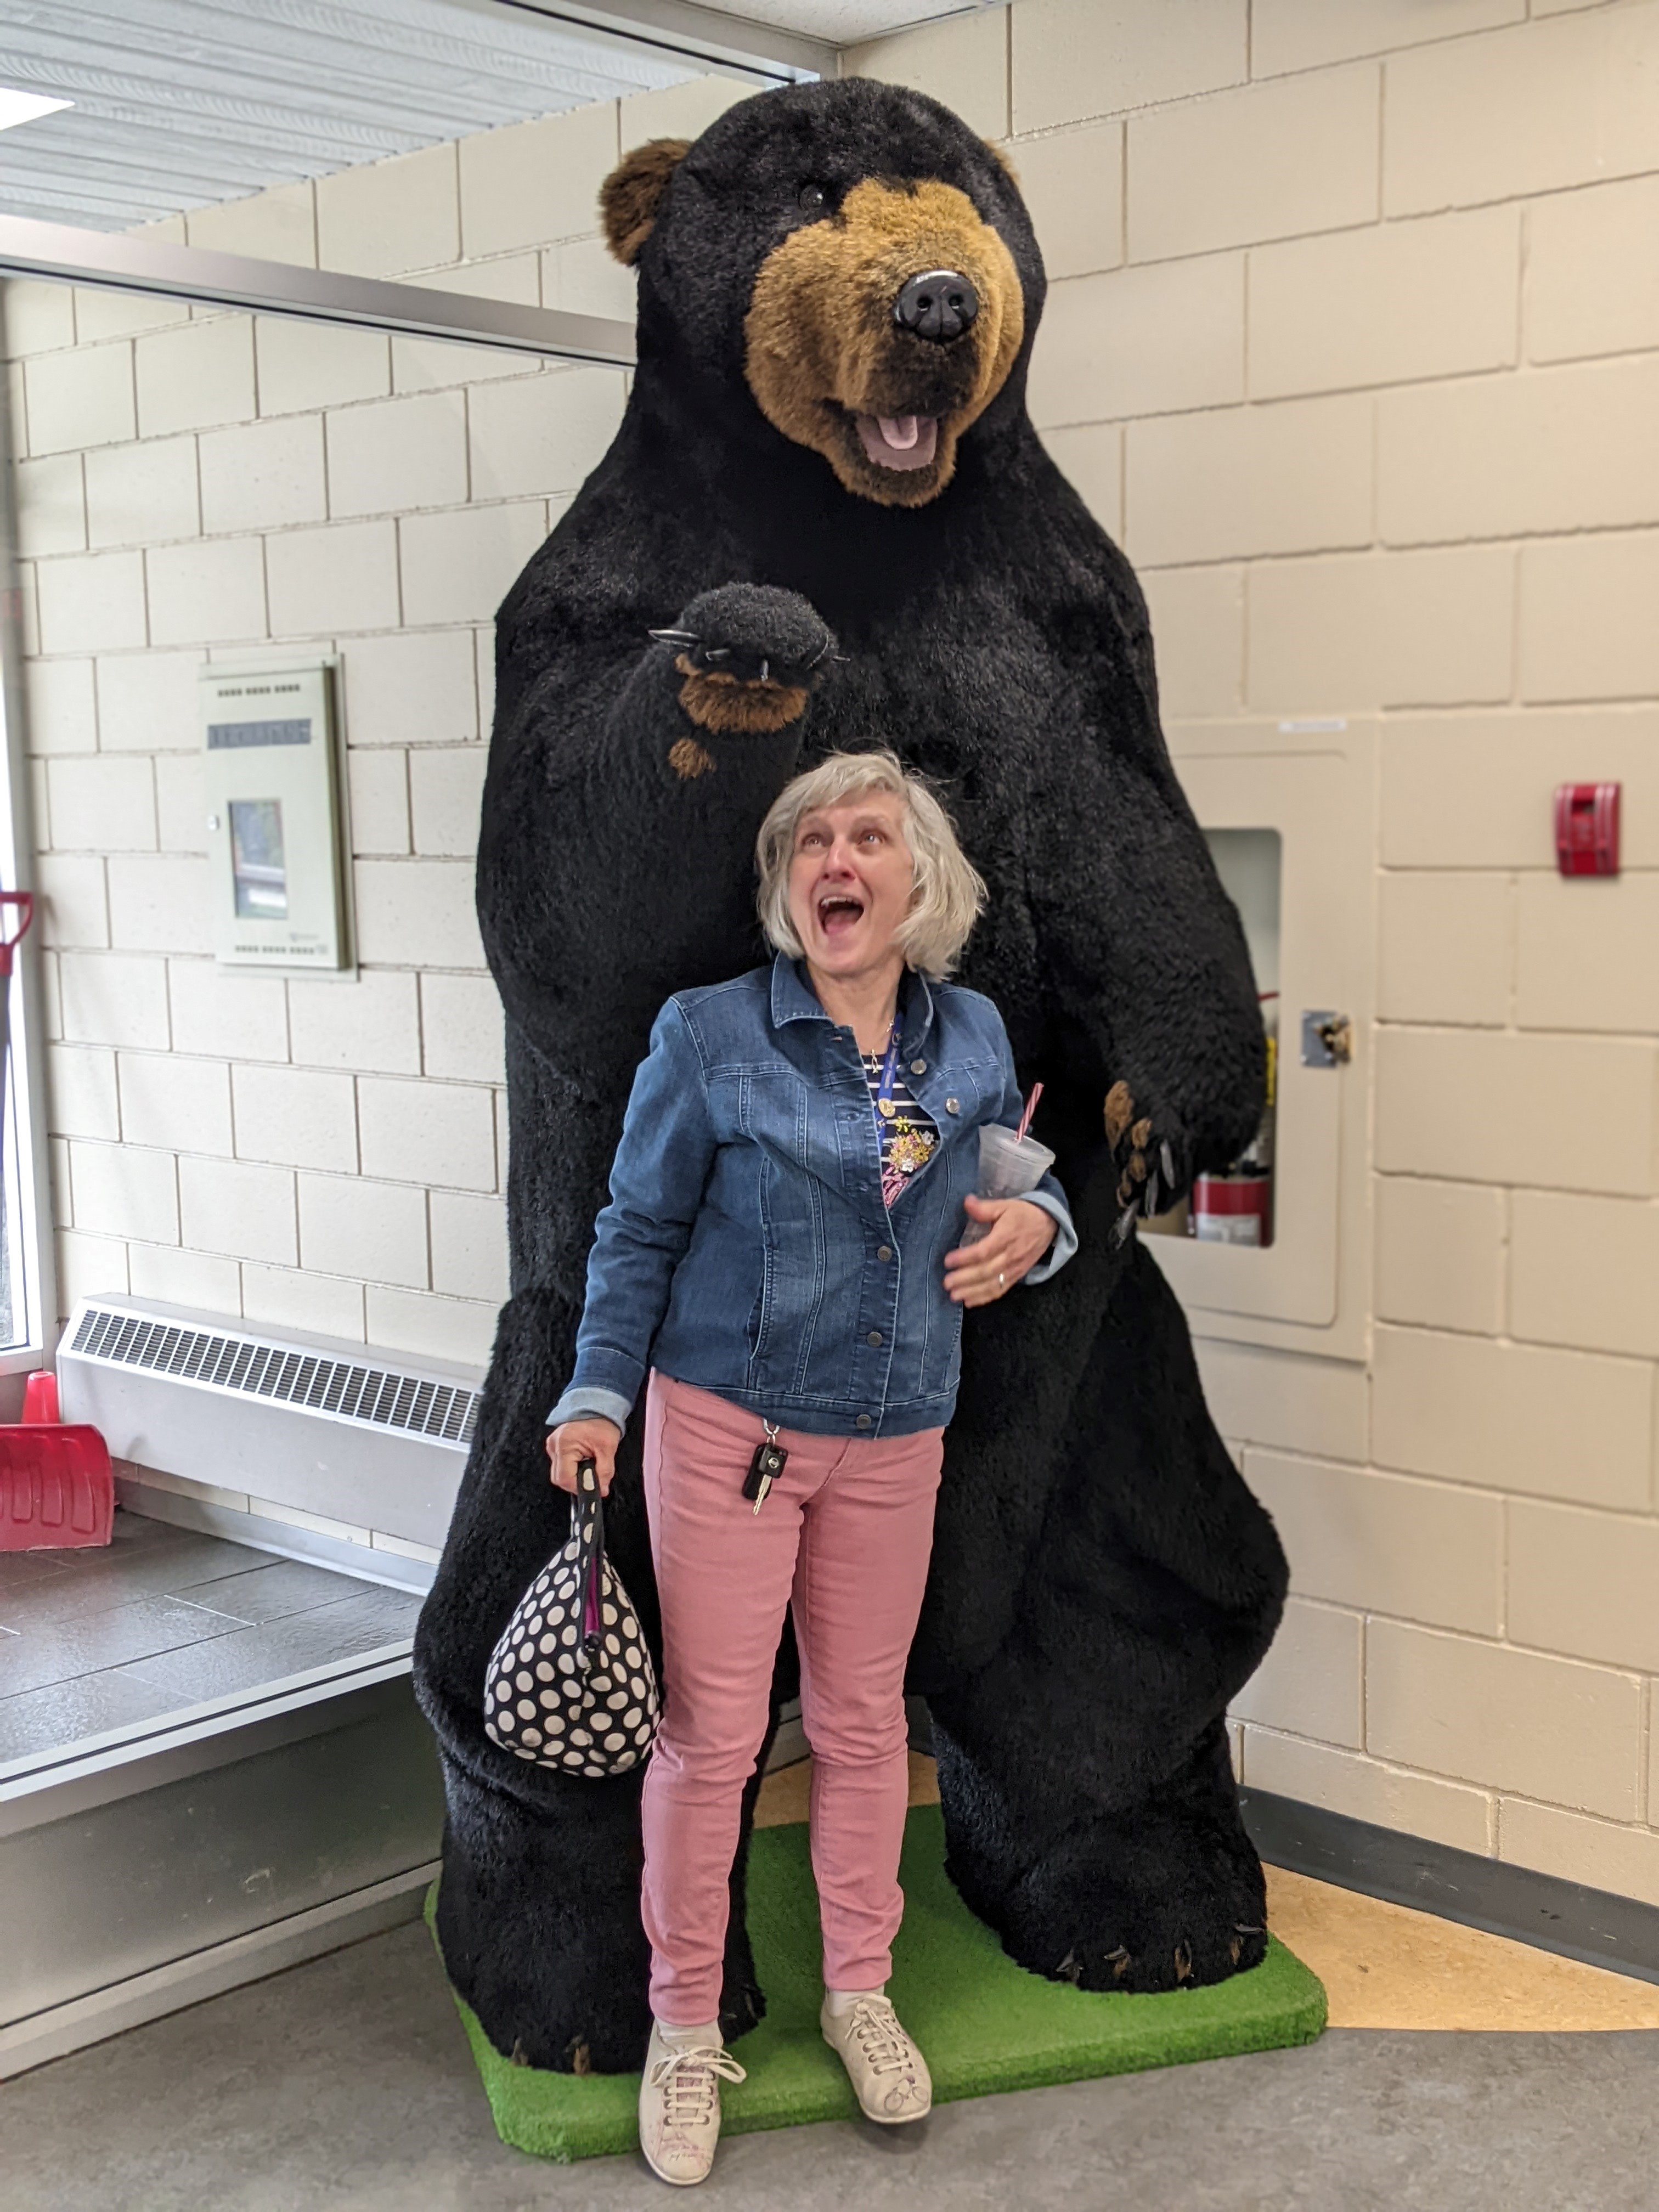 A woman pretending to look scared in front of a large, stuffed bear.